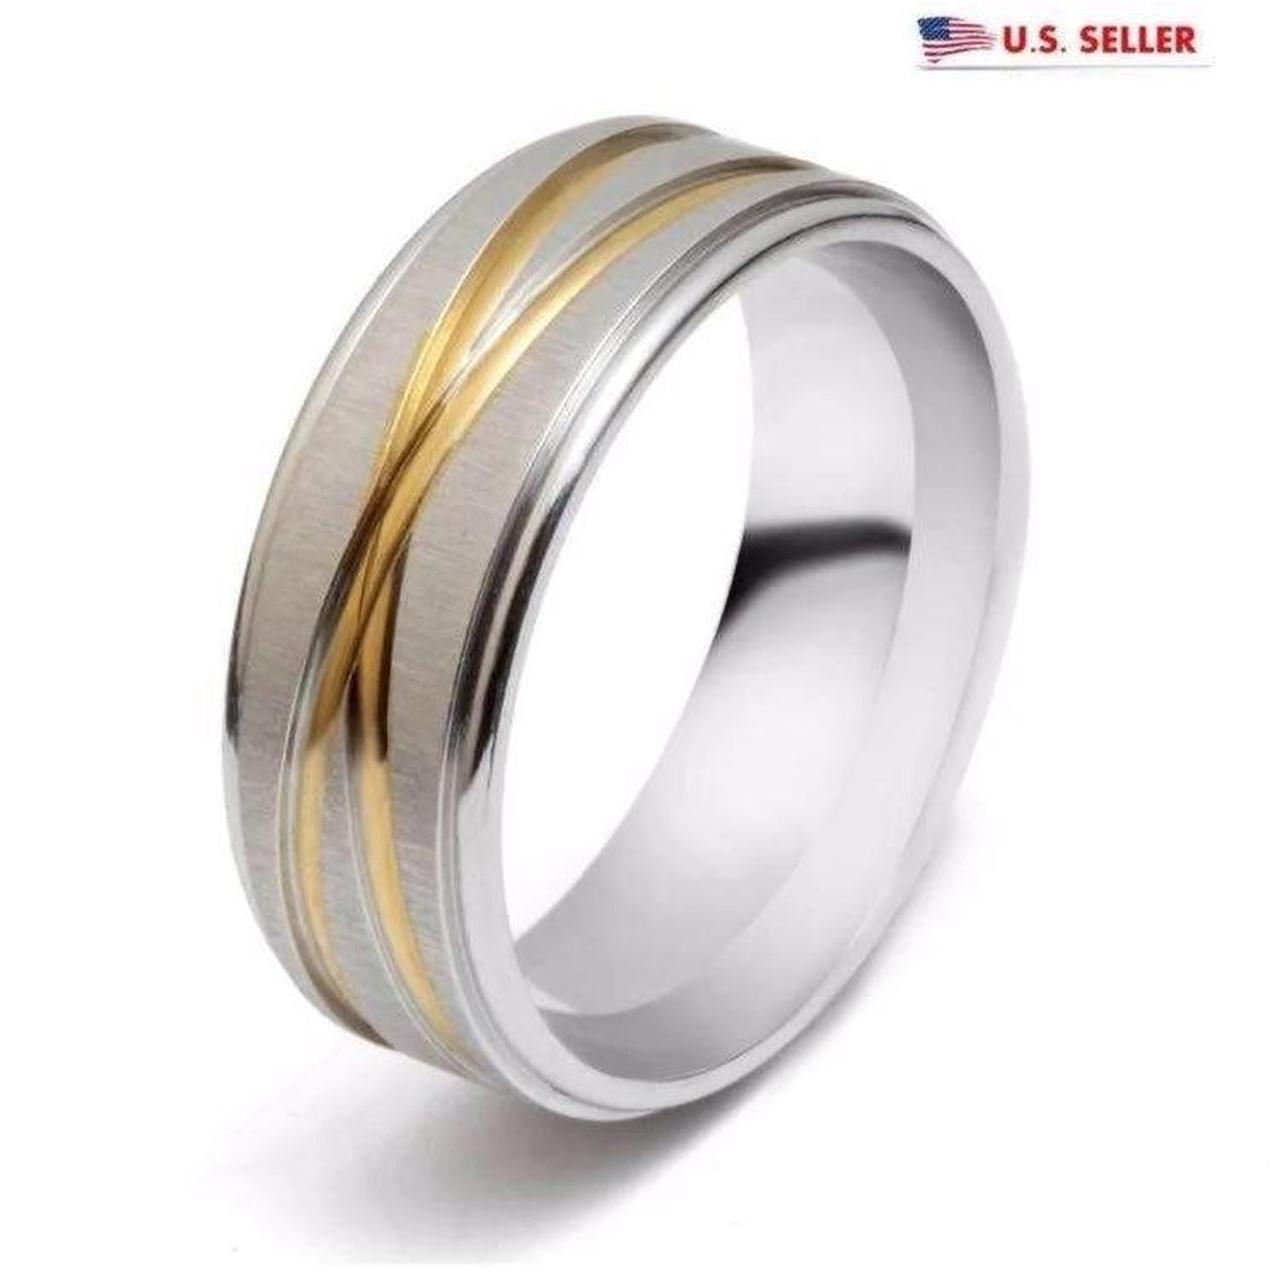 Product Image 3 - Golden infinity silver ring
Condition: NEW
Material: